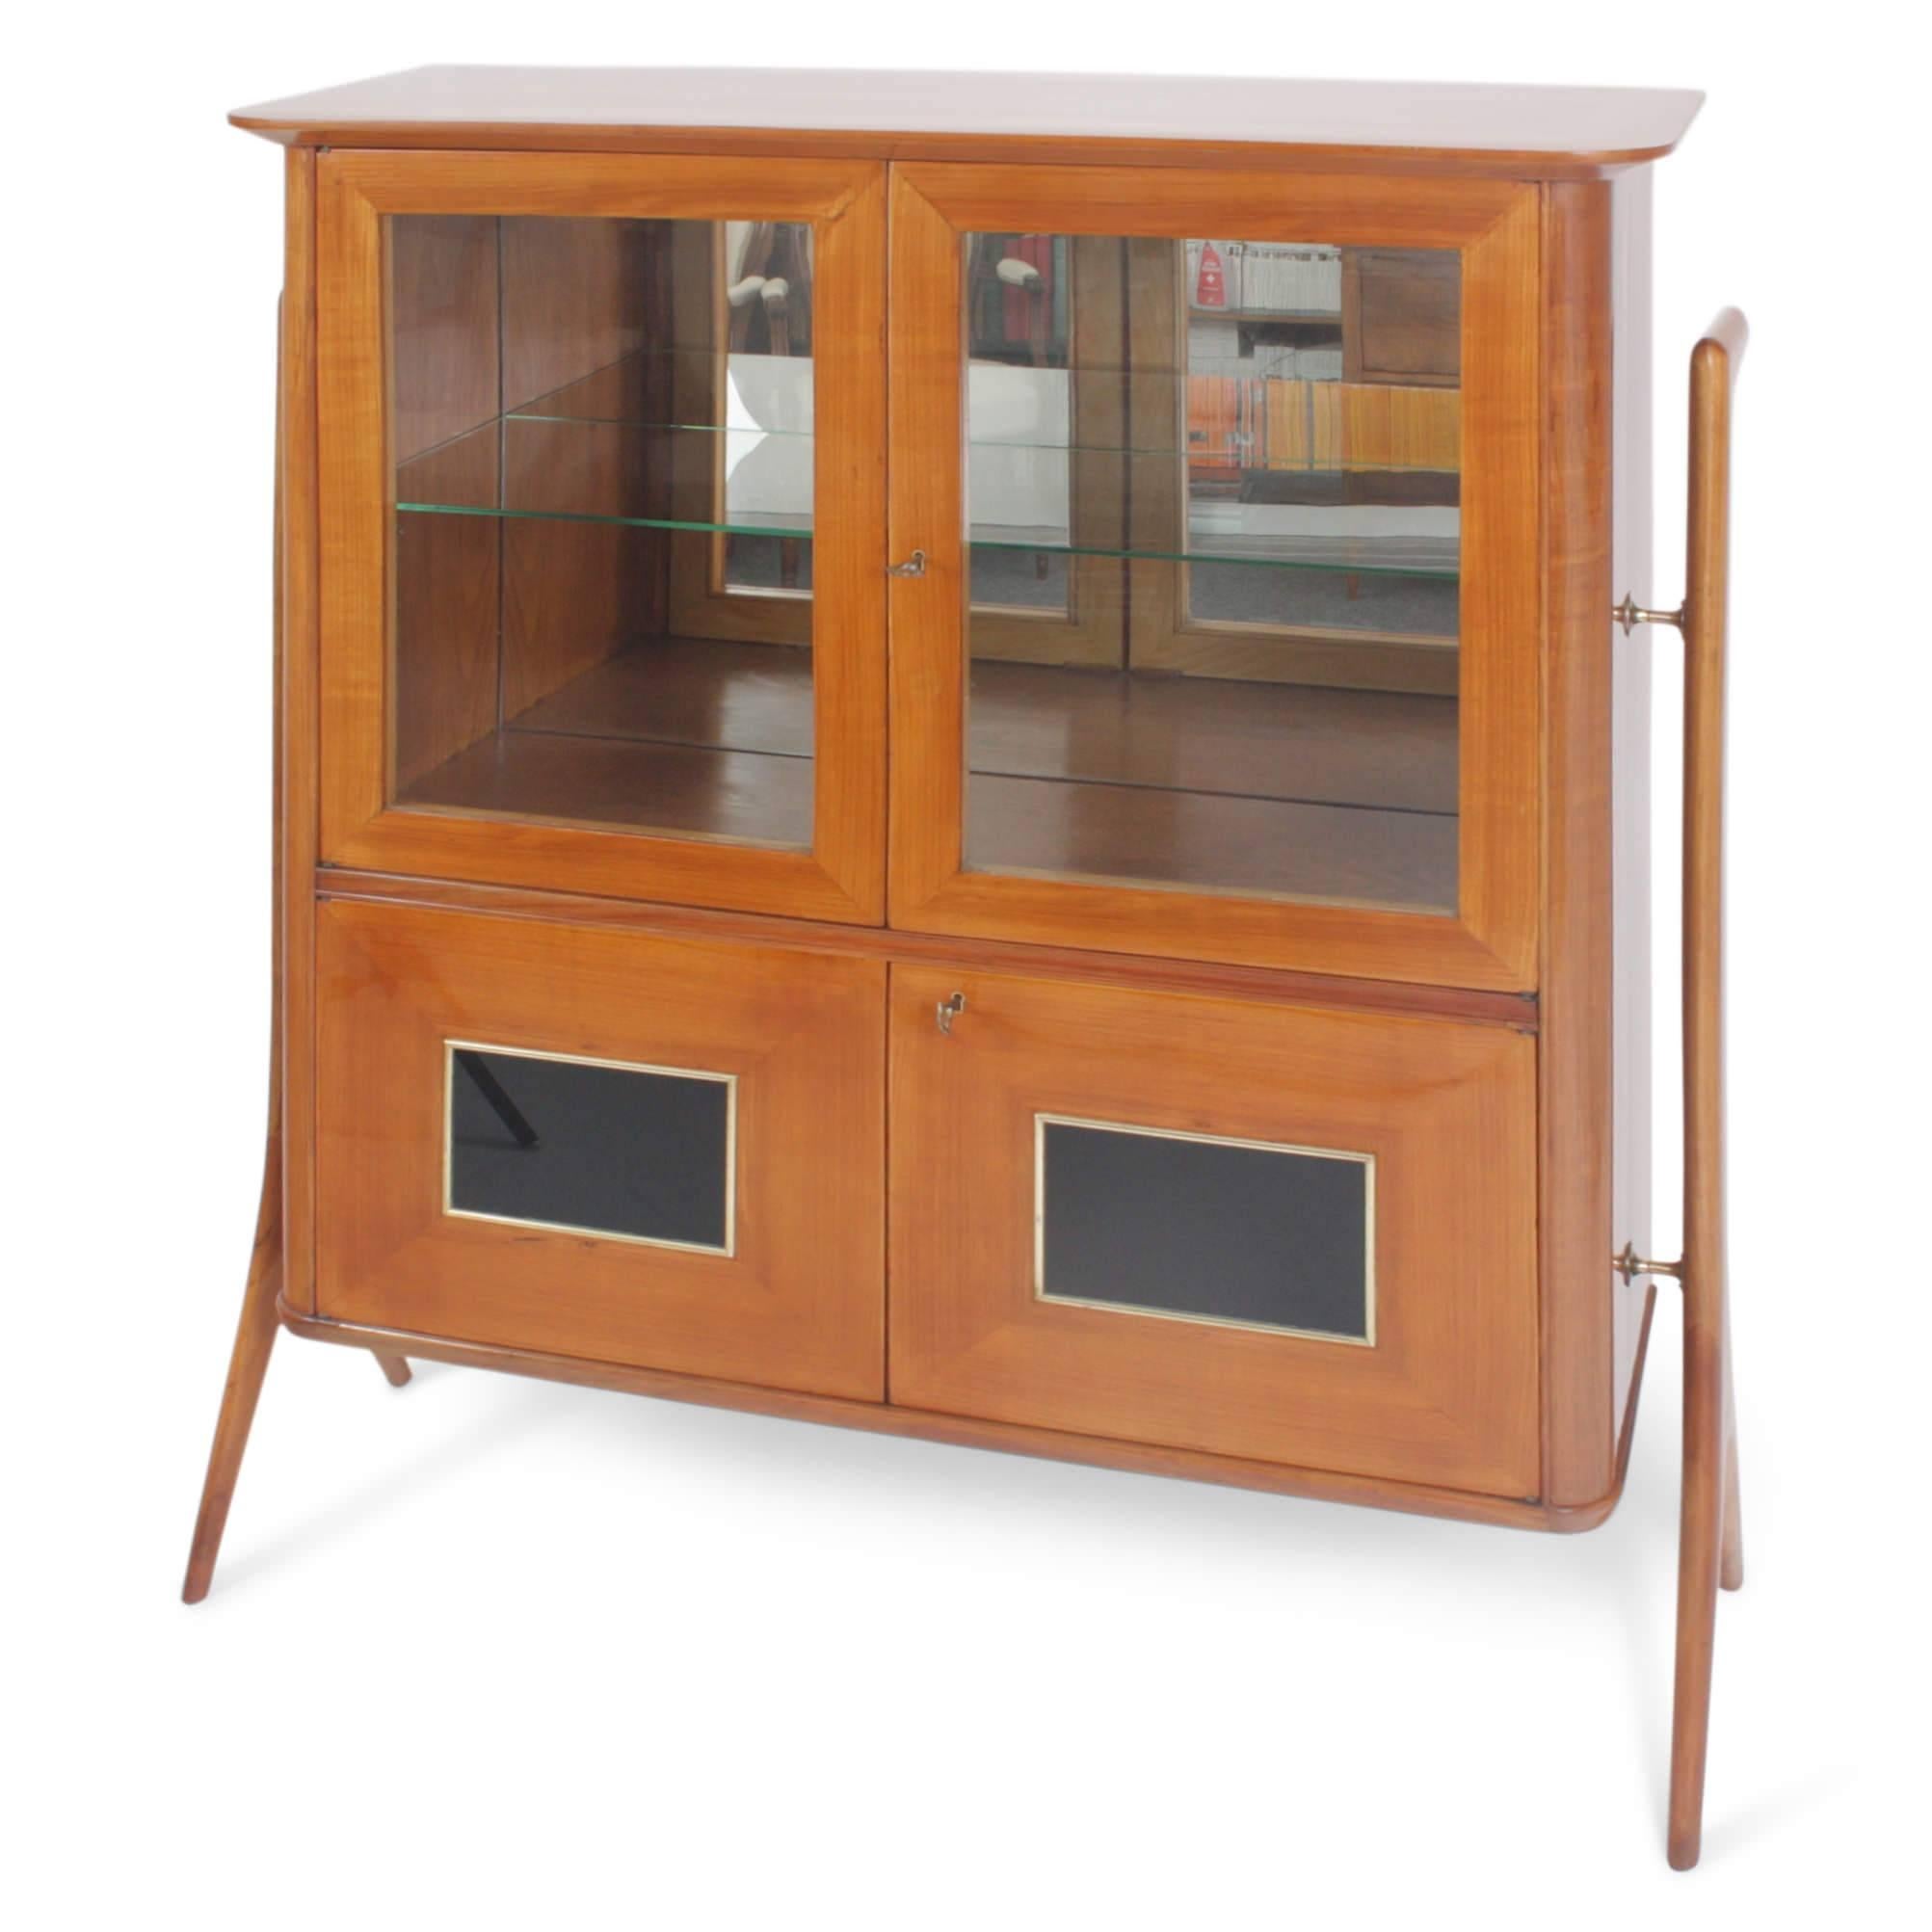 Italian Highboard out of cheerywood, on a forked stand with two glazed doors and two smaller doors, decorated with an ebonized square with brass framing. The rear wall of the display case is mirrored.